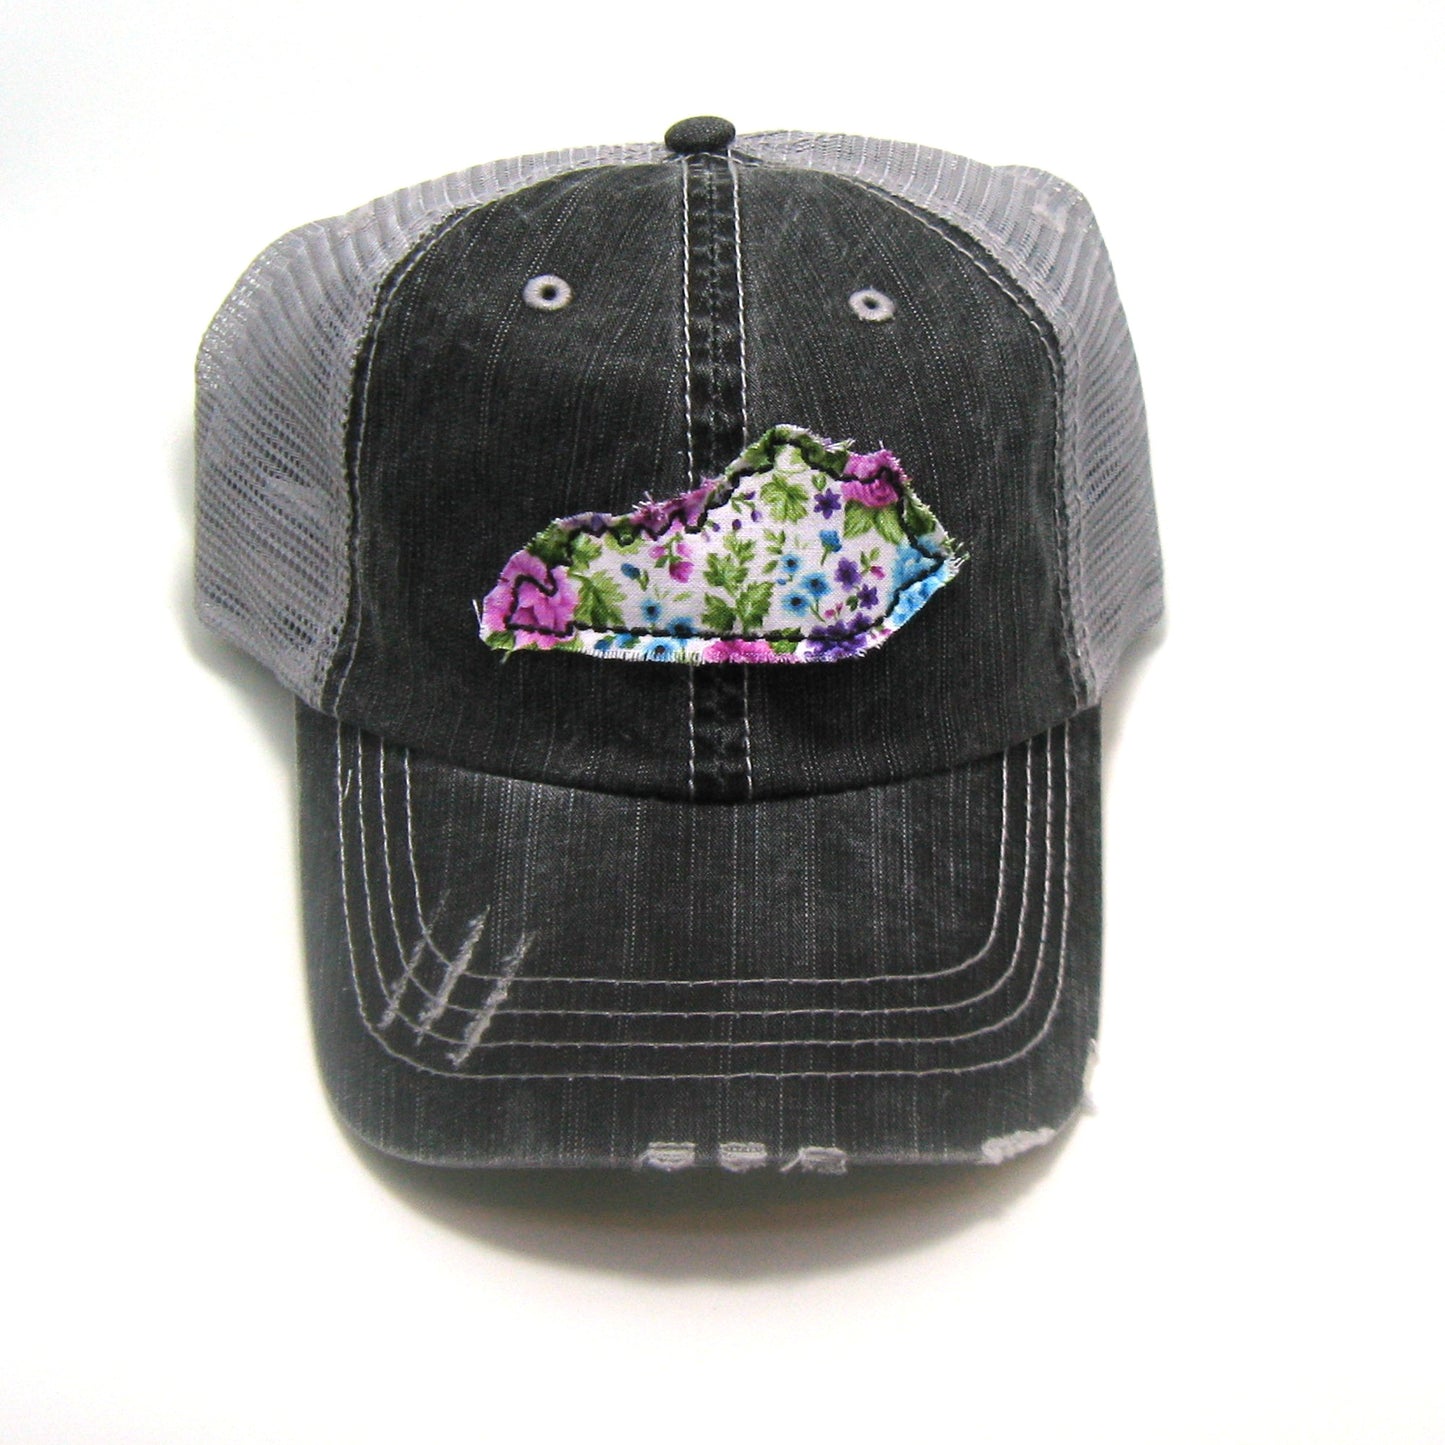 gray distressed trucker hat with gray floral fabric state of Kentucky